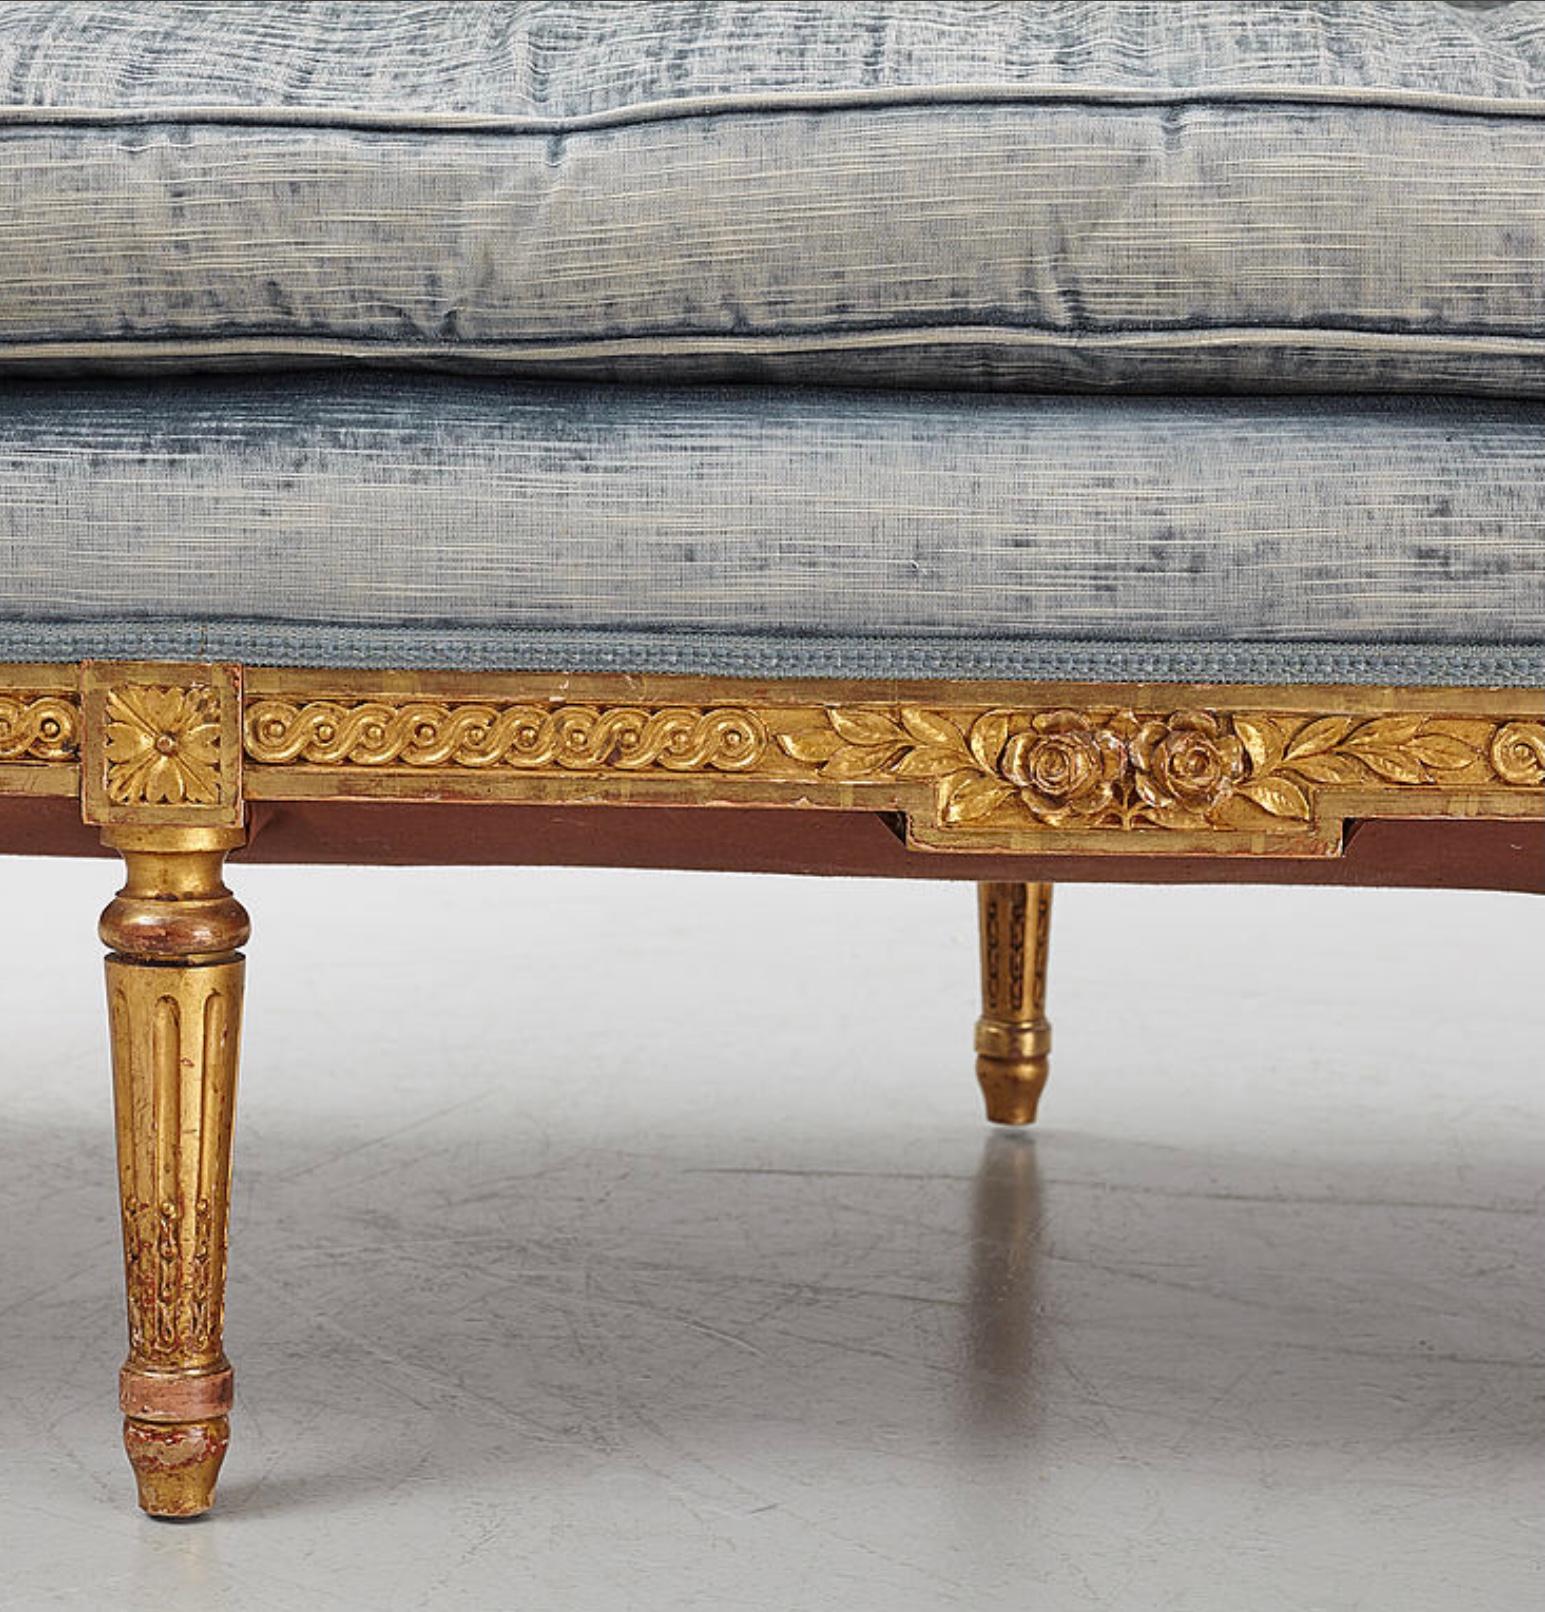 1900s Swedish Two-Seater Gustavian Style Gilt Velvet Sofa with Carved Decoration 1